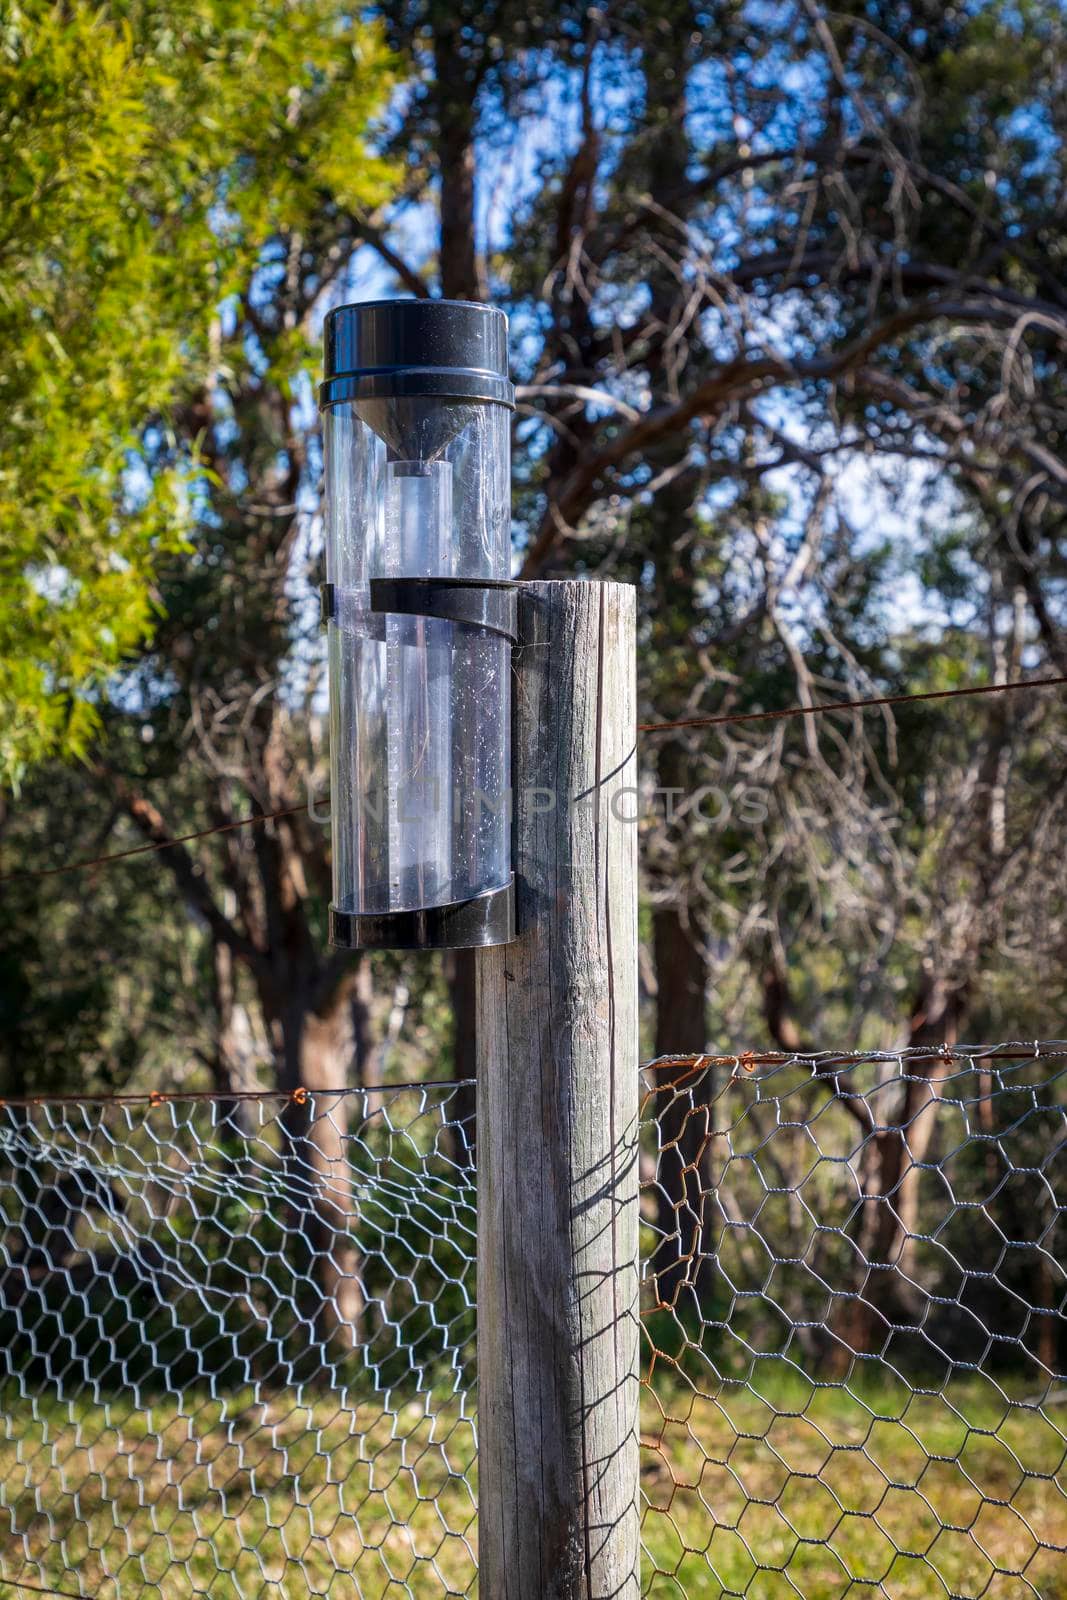 A rain gauge bolted to a wooden fence posts near trees